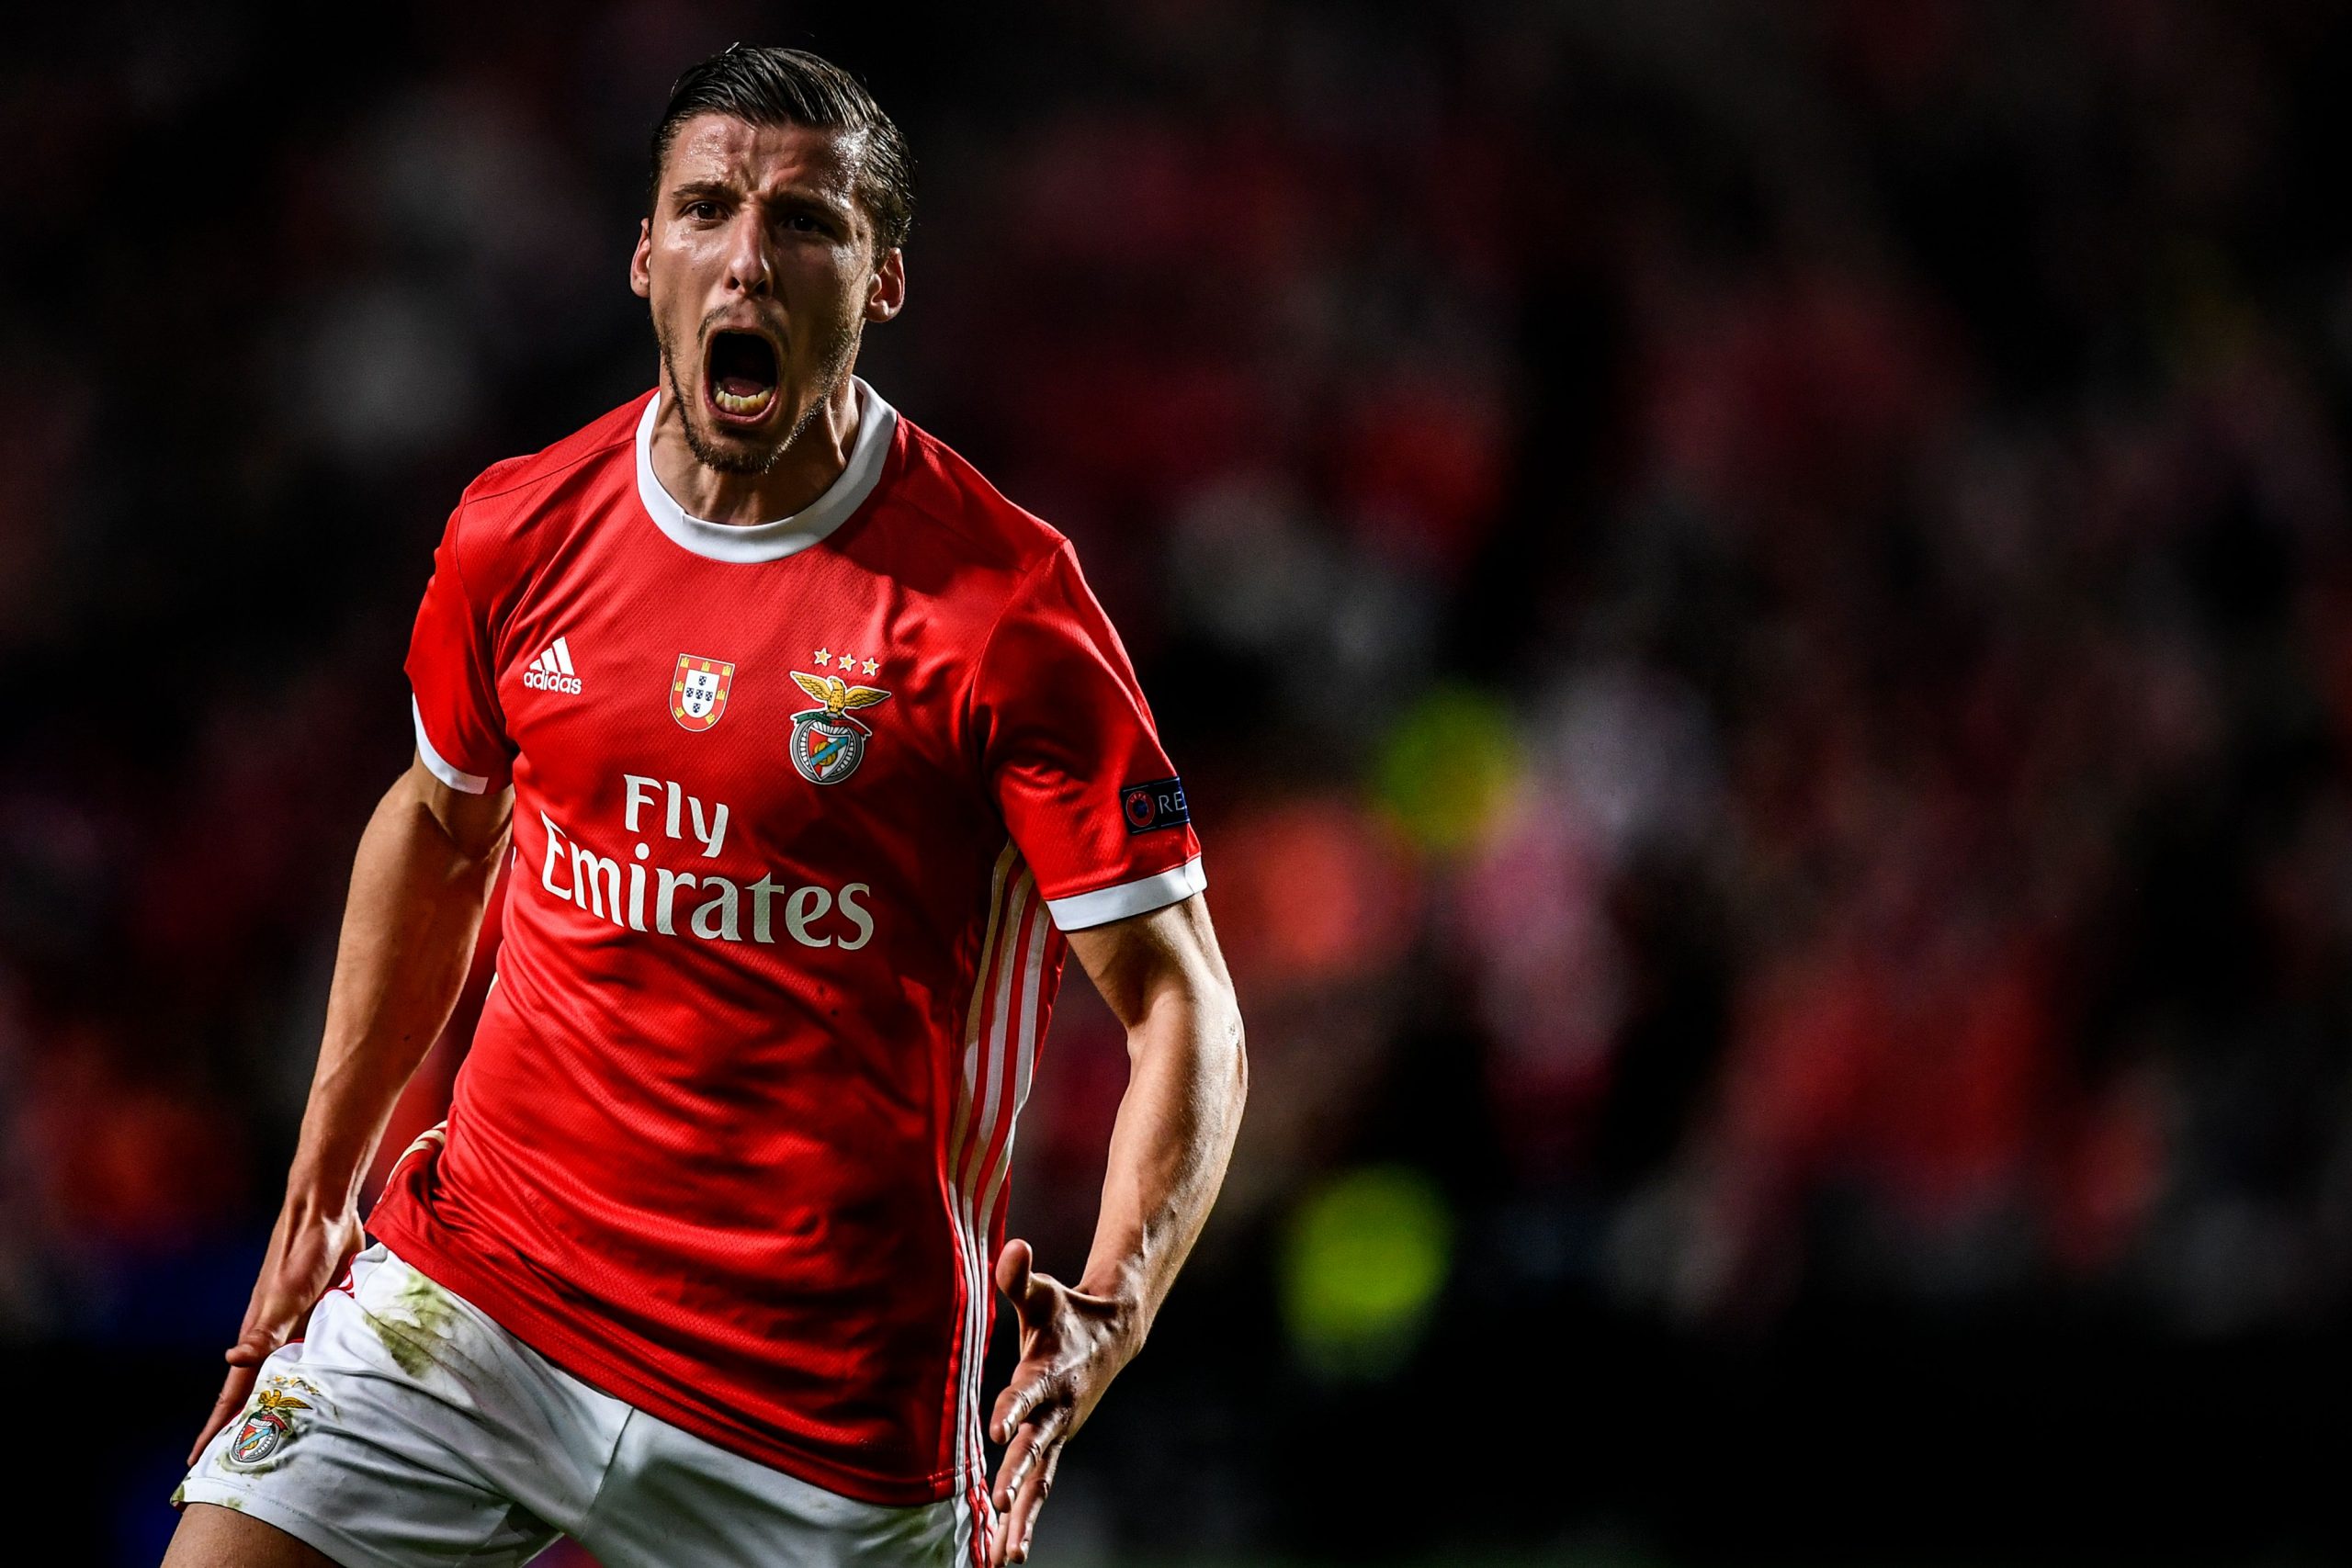 Benfica defender Ruben Dias celebrates after scoring in the UEFA Europa League match against Shakhtar Donetsk at the Luz stadium in Lisbon.